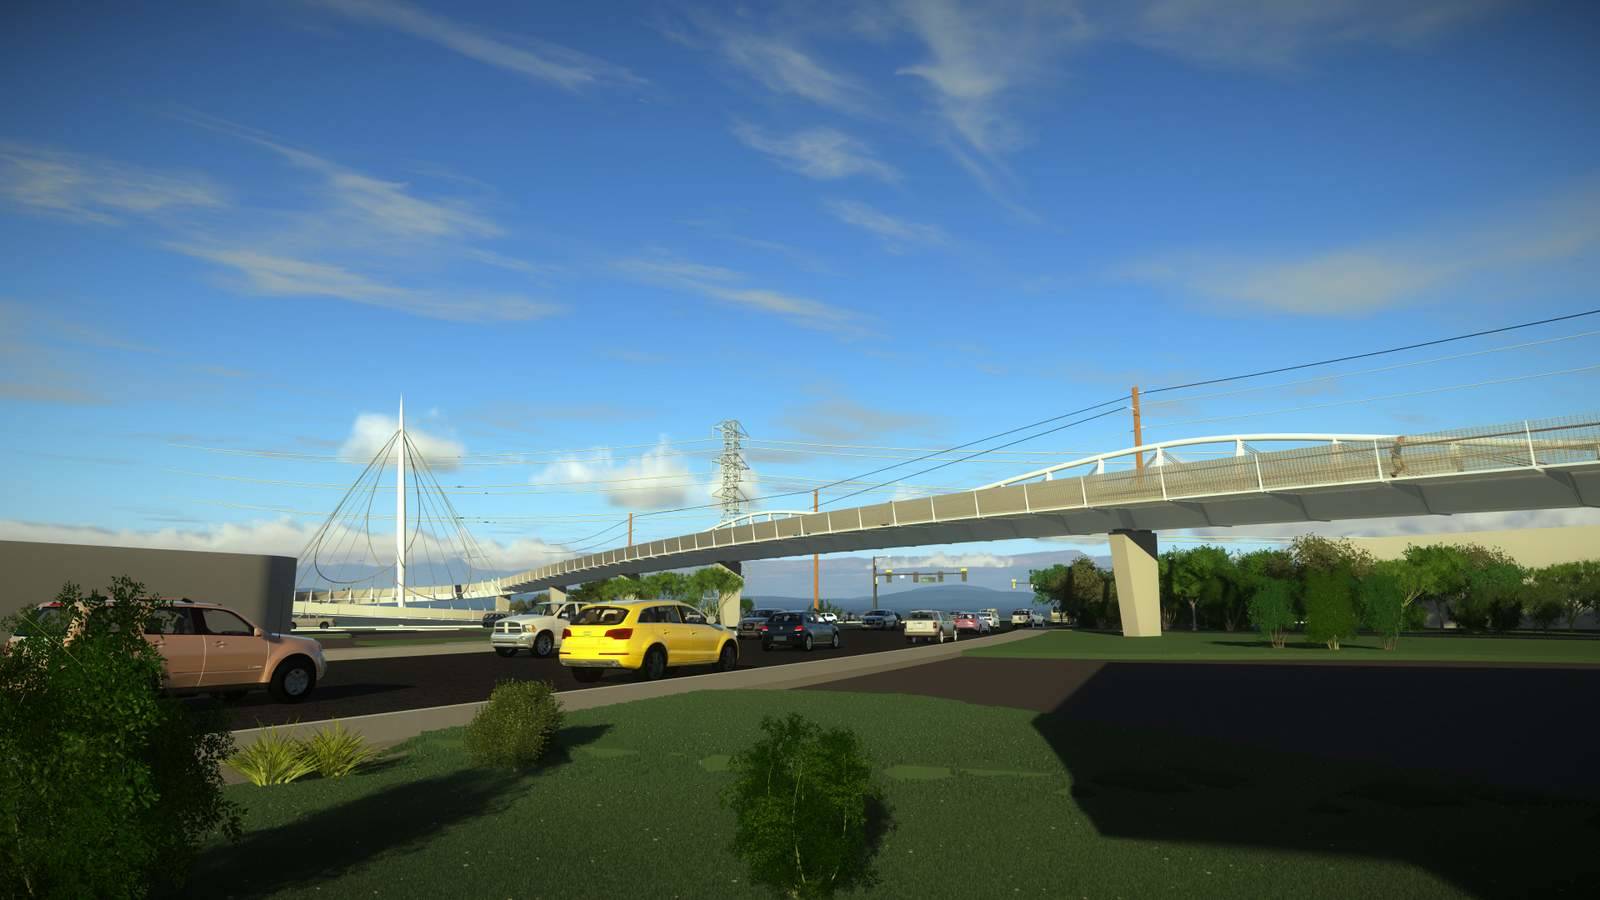 A rendering shows what the “Suspended Ring” version of the Totem Lake Connector Bridge could look like. Submitted art